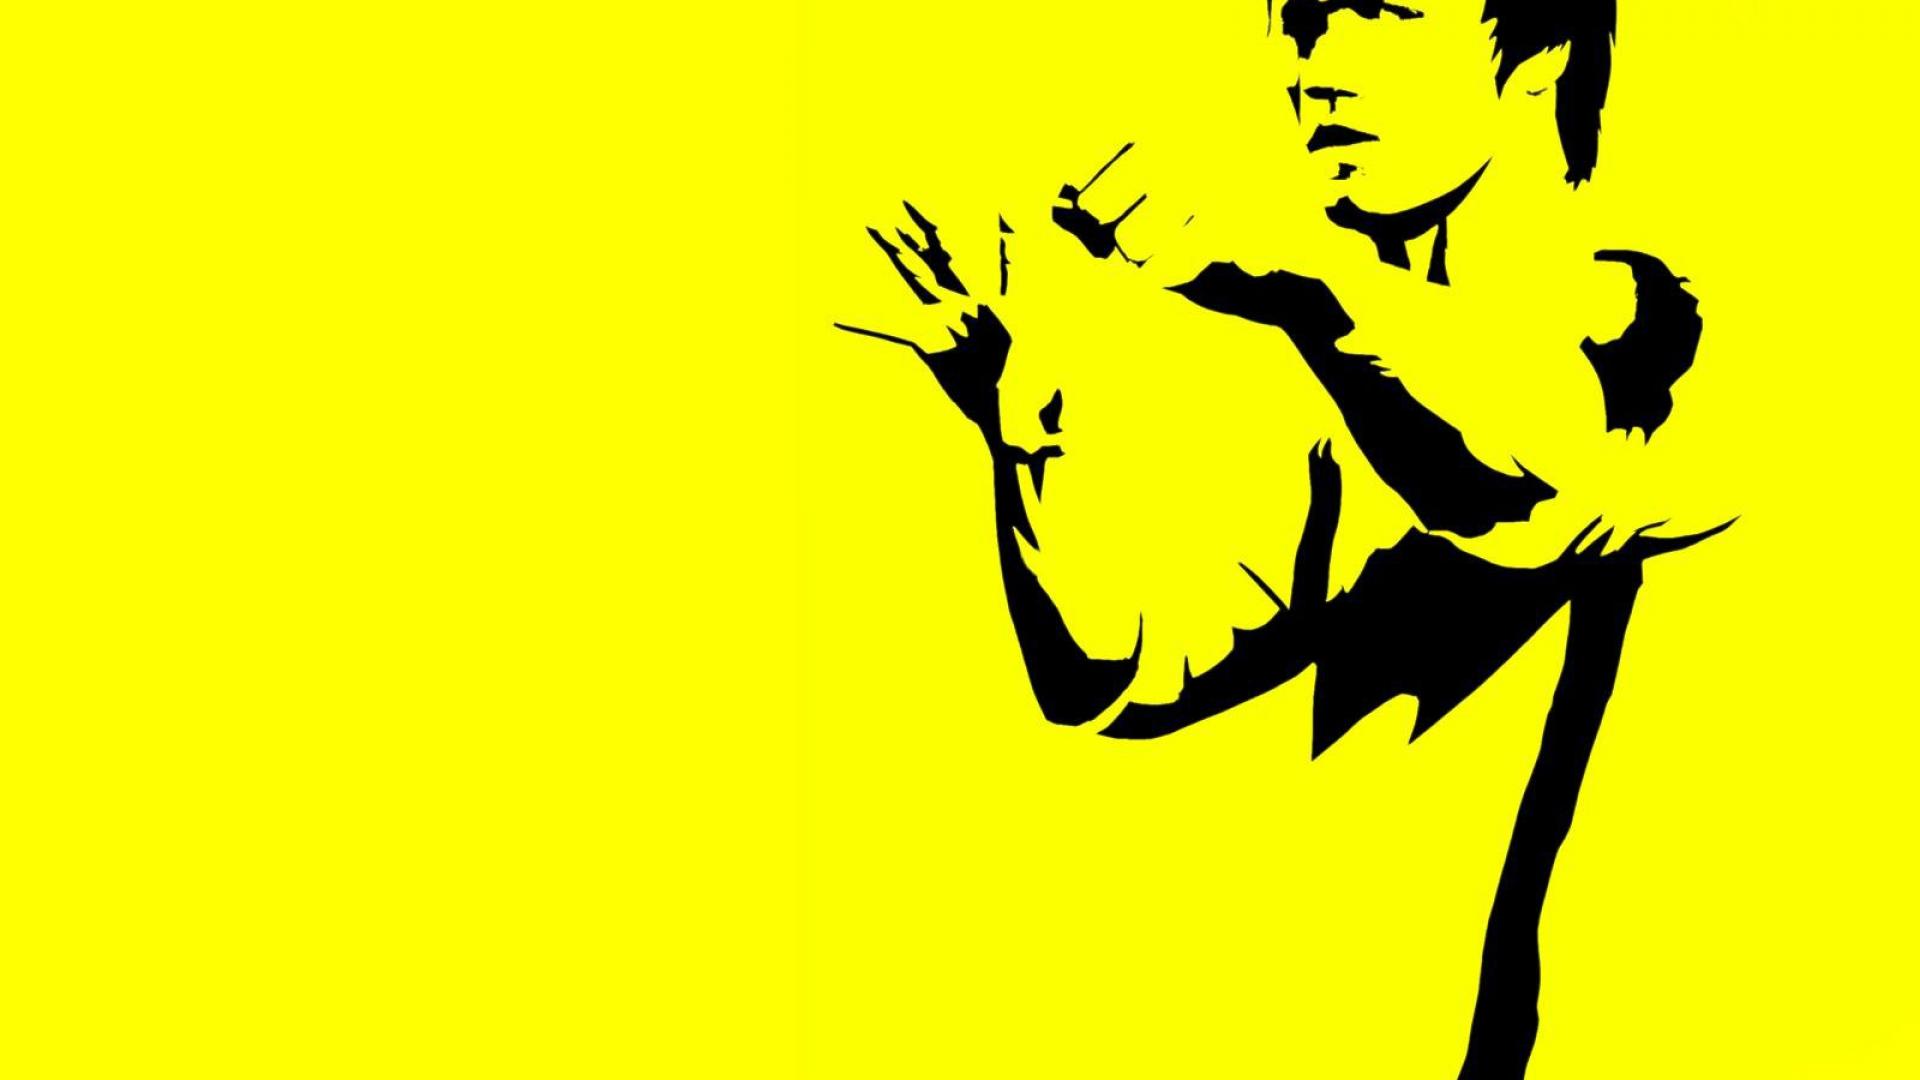 Bruce Lee Wallpapers HD A1